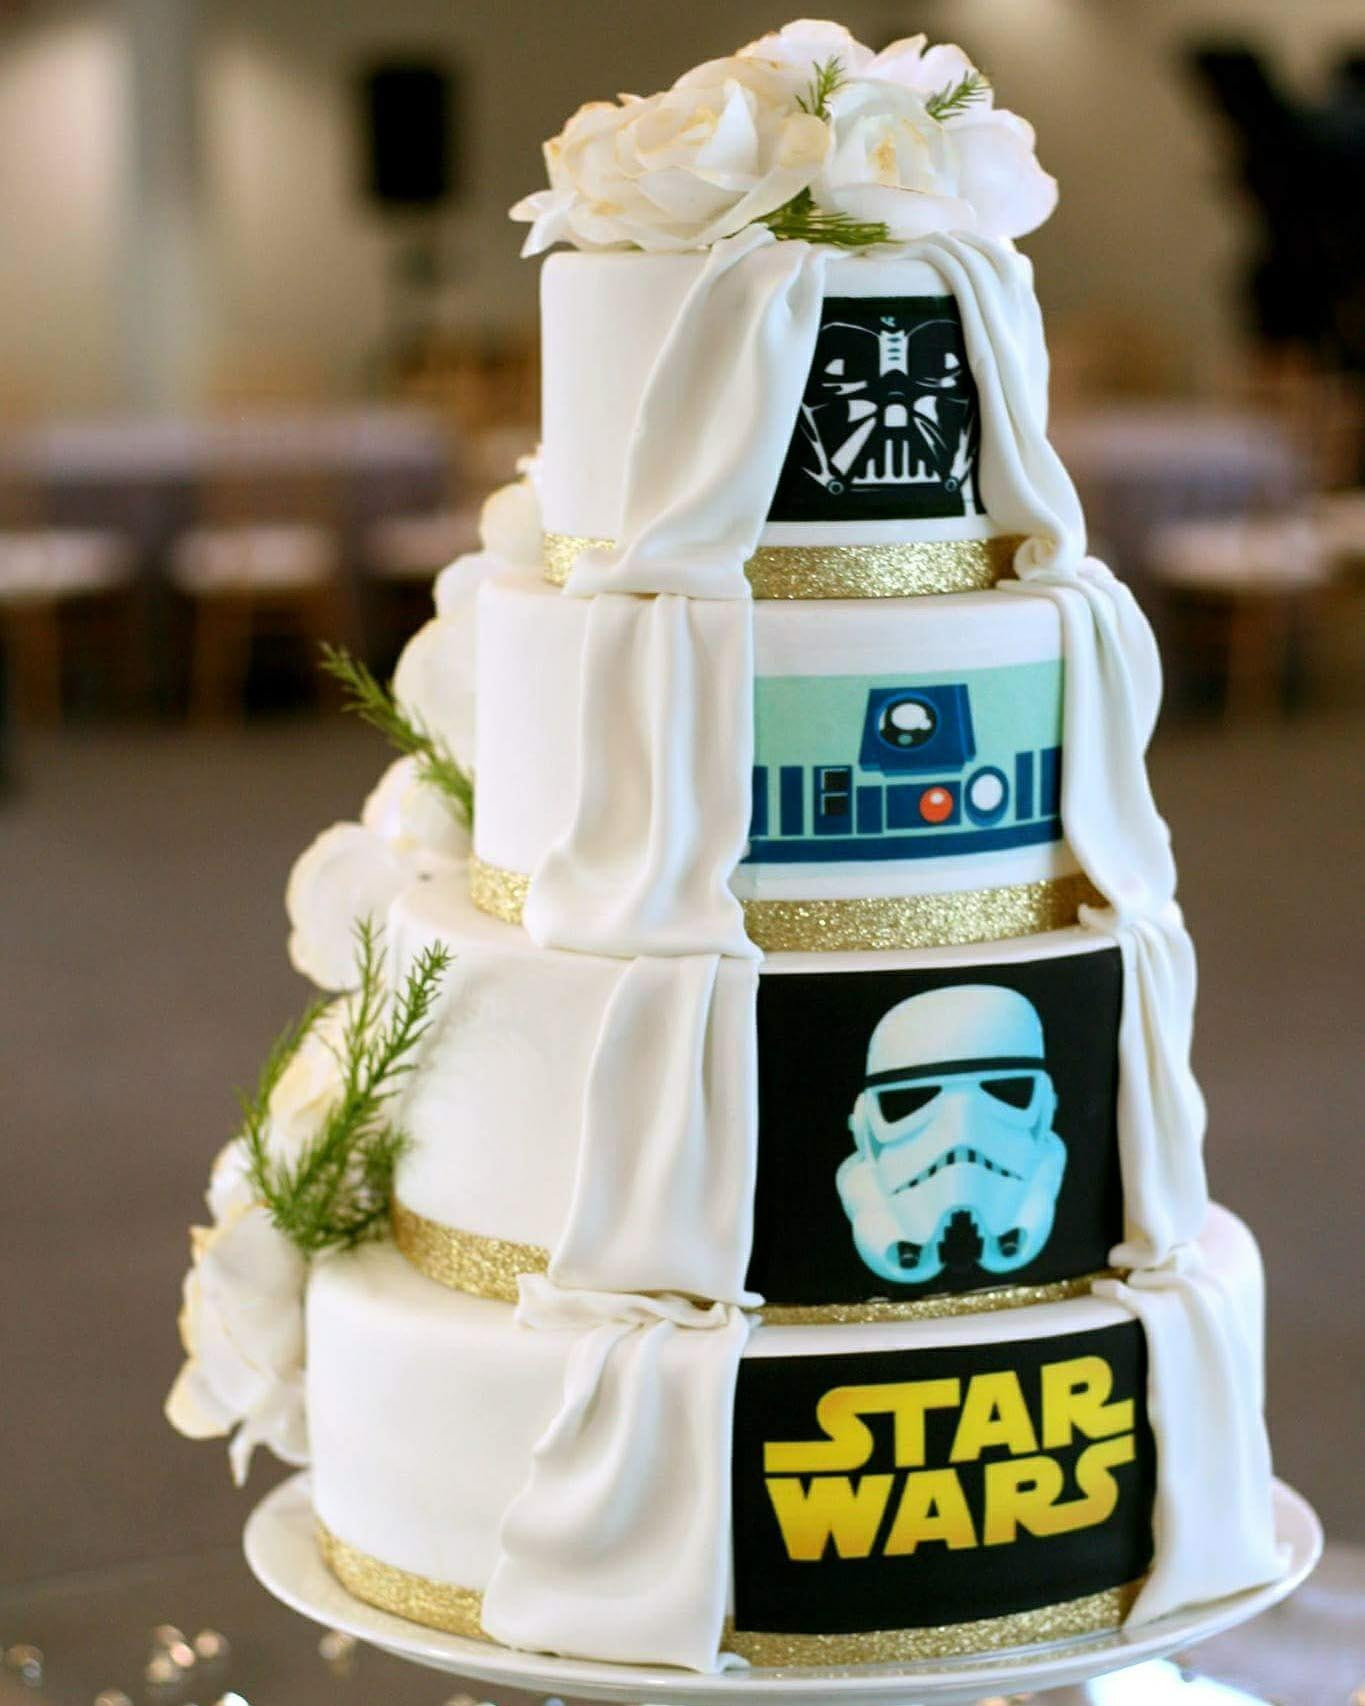 Star Wars Wedding Cake
 May the force be with you as you plan a Star Wars wedding